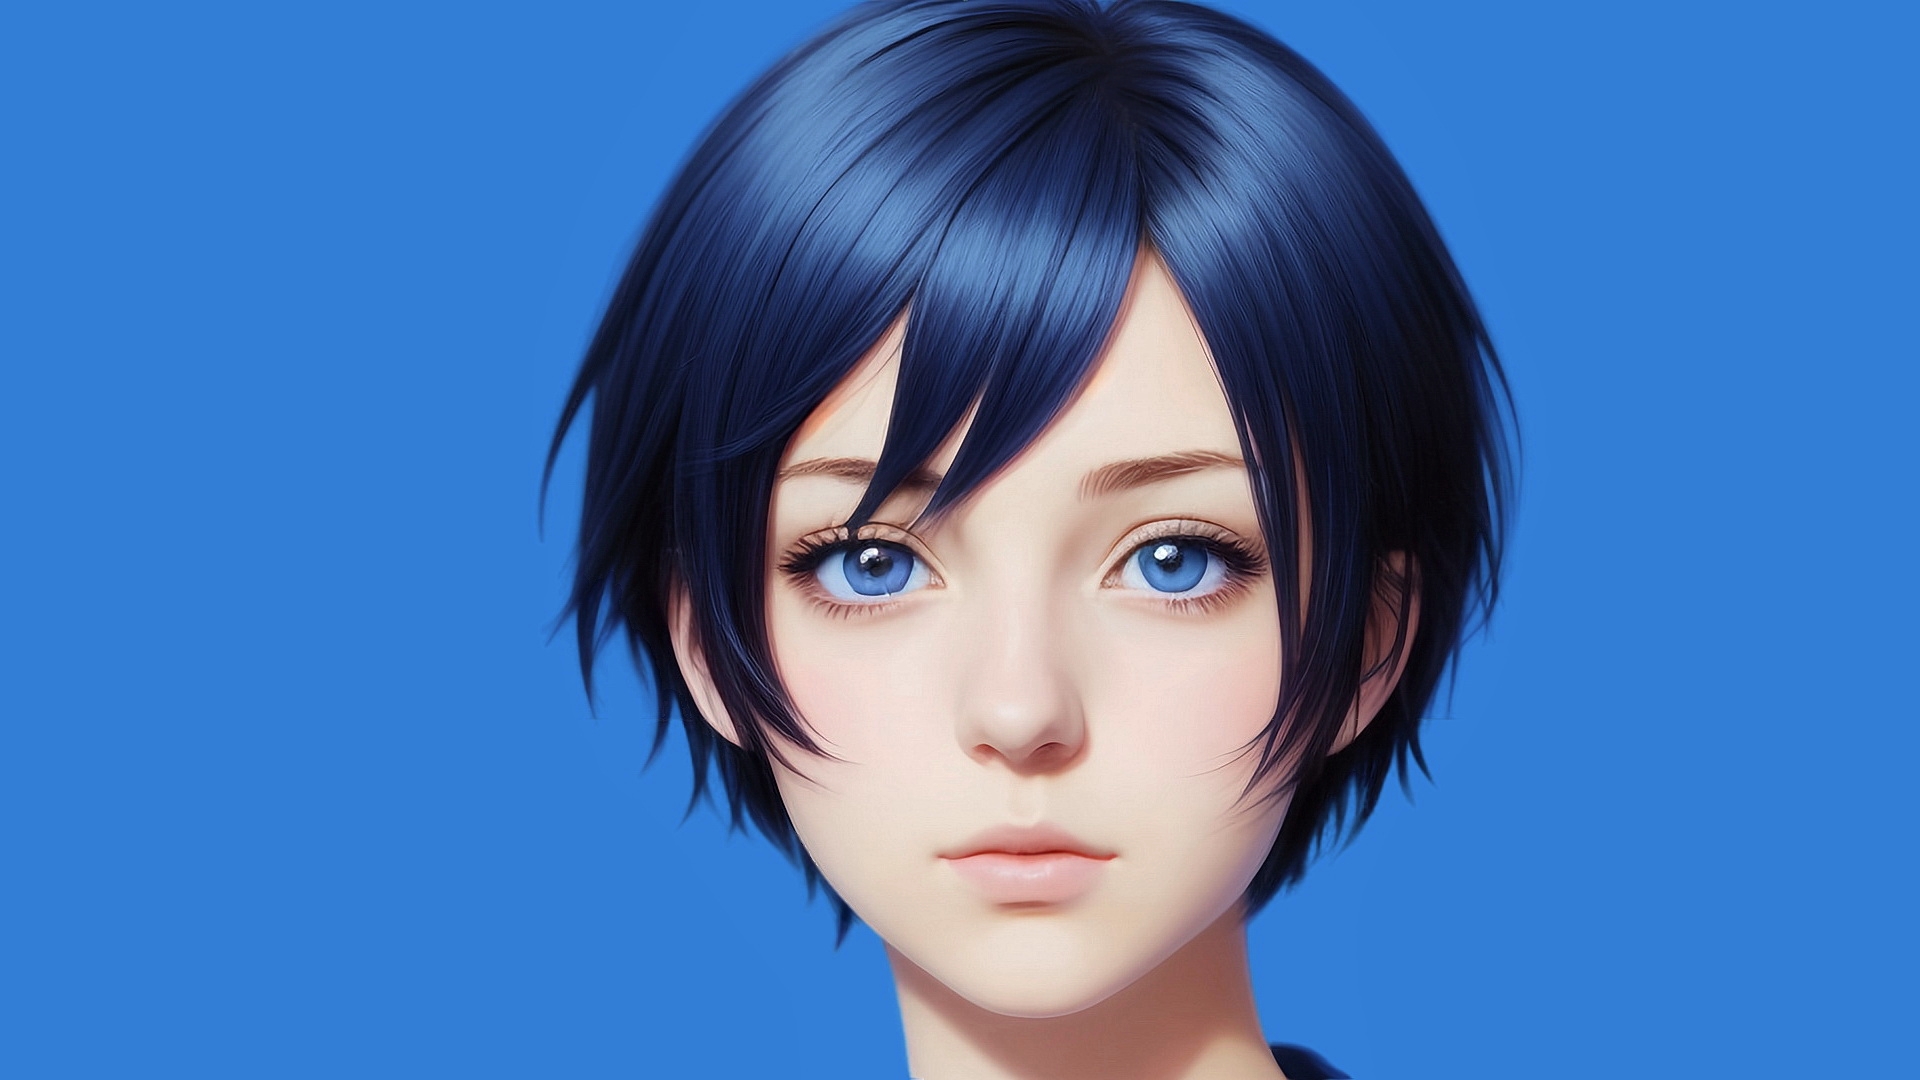 Free photo Portrait of an anime girl on a blue background